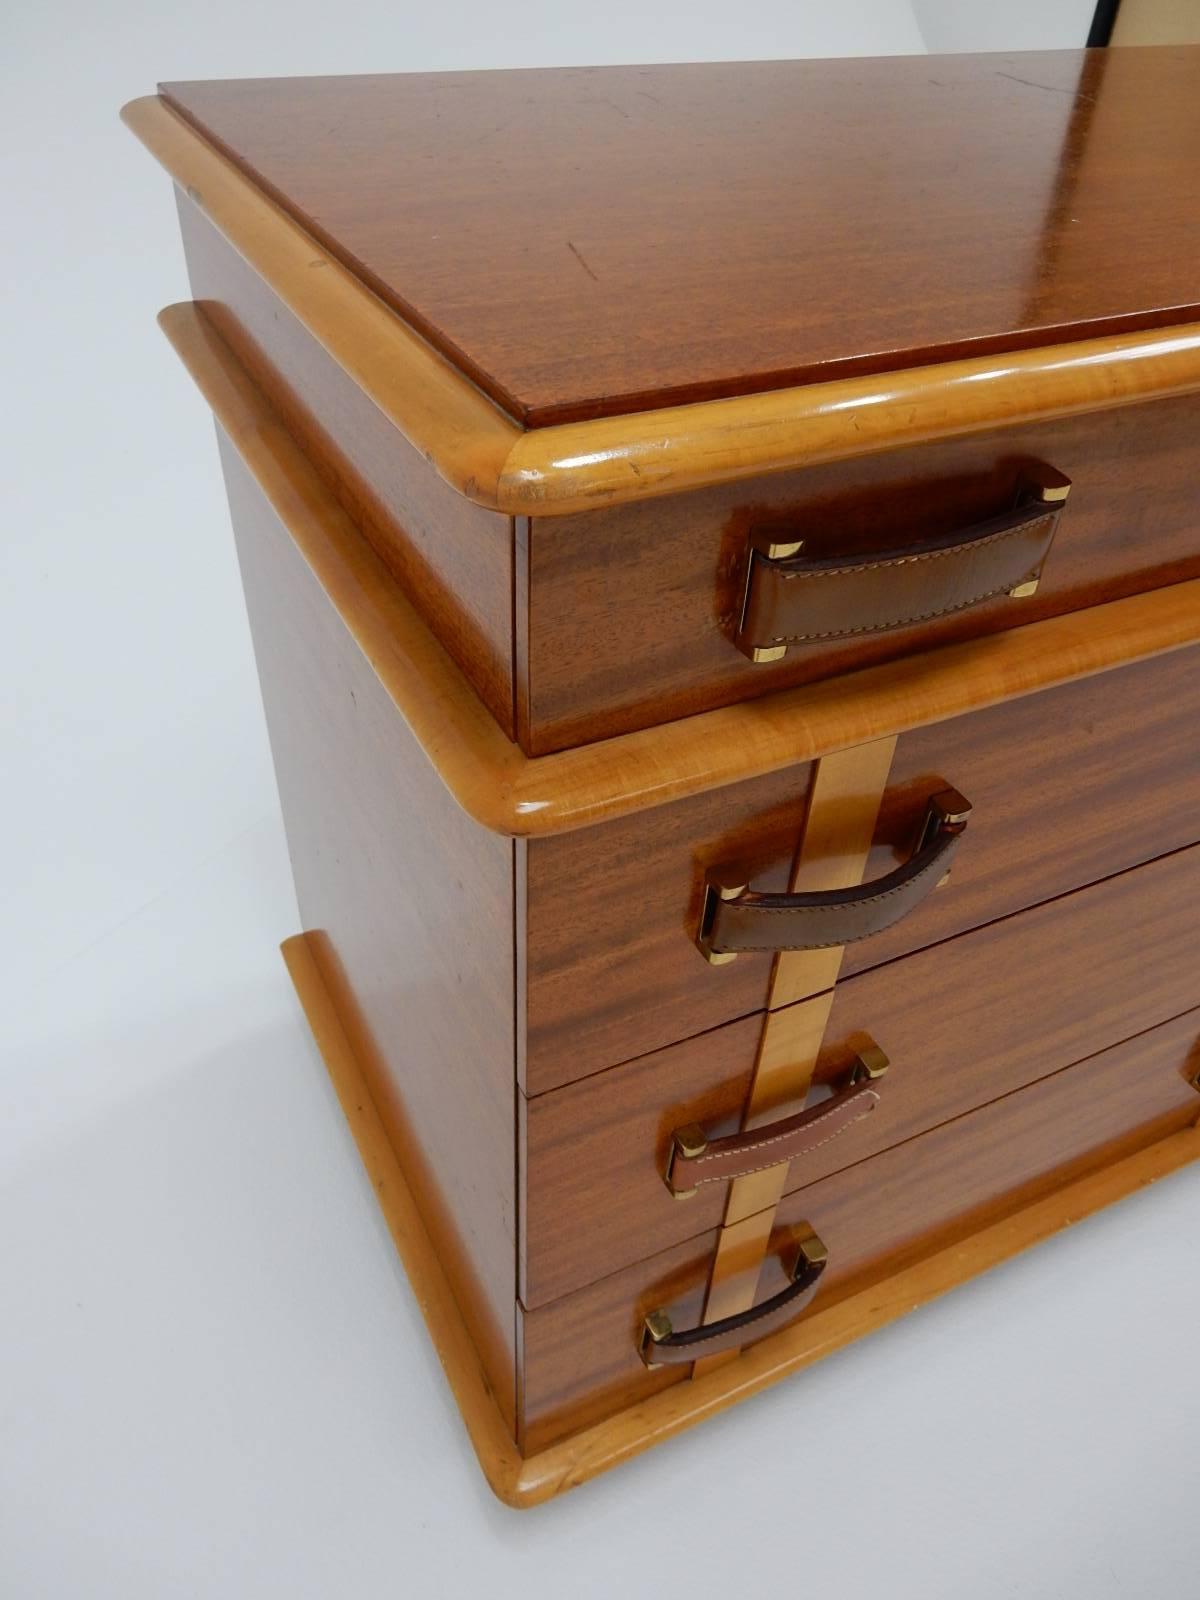 American Chest of Drawers by Paul Frankl from the 